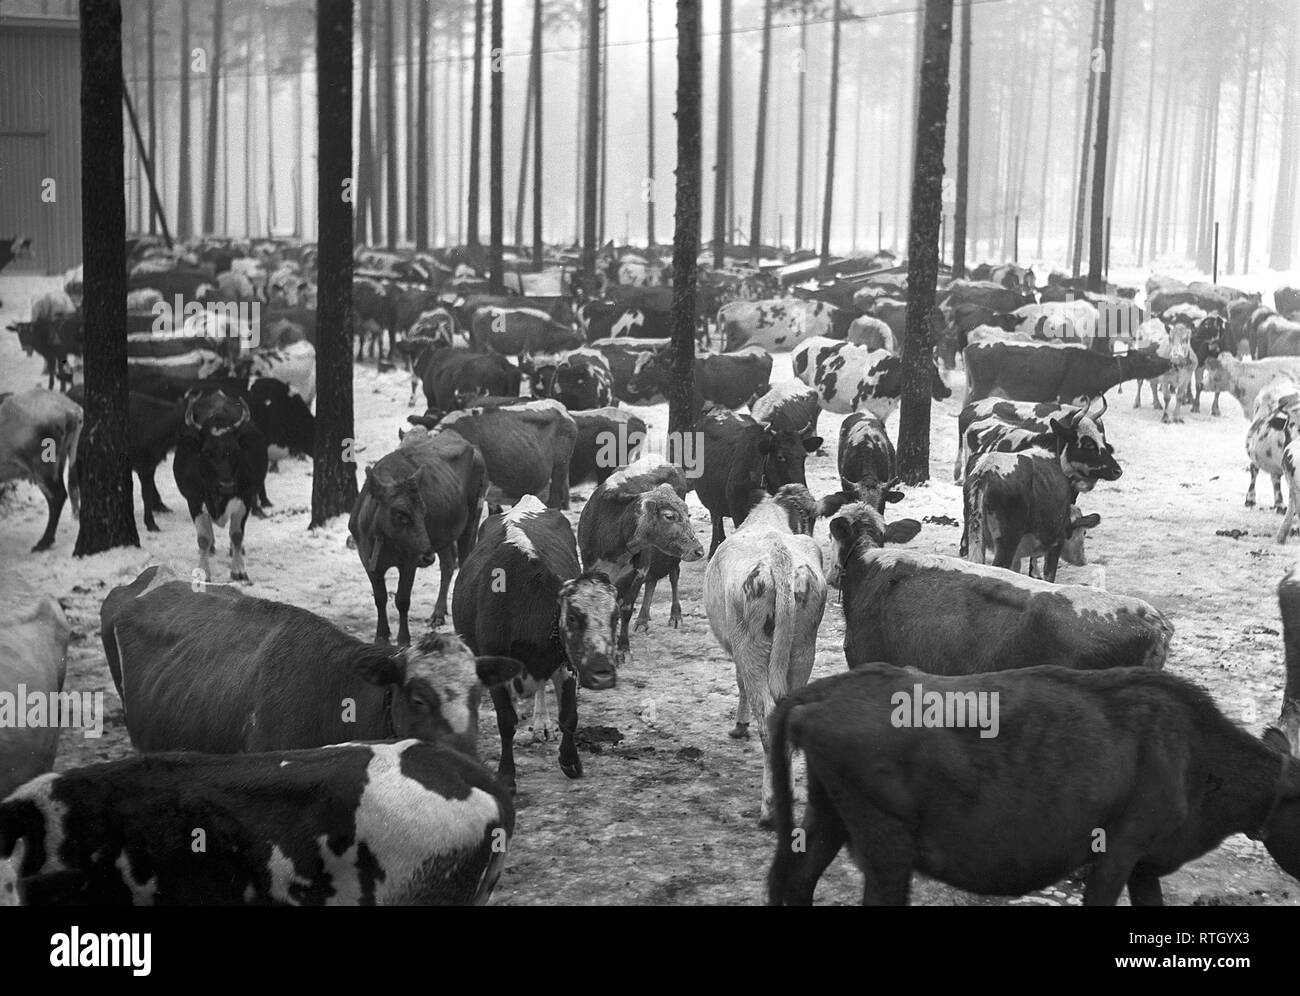 The Winter War. A military conflict between the Soviet union and Finland. It began with a Soviet invasion on november 1939 when Soviet infantery crossed the border on the Karelian Isthmus. About 9500 Swedish volunteer soldiers participated in the war. Here on the Karelian Isthmus hundreds of cows is rounded up as their owners have been evacuated.   December 1939. Photo Kristoffersson ref 93-4. Stock Photo